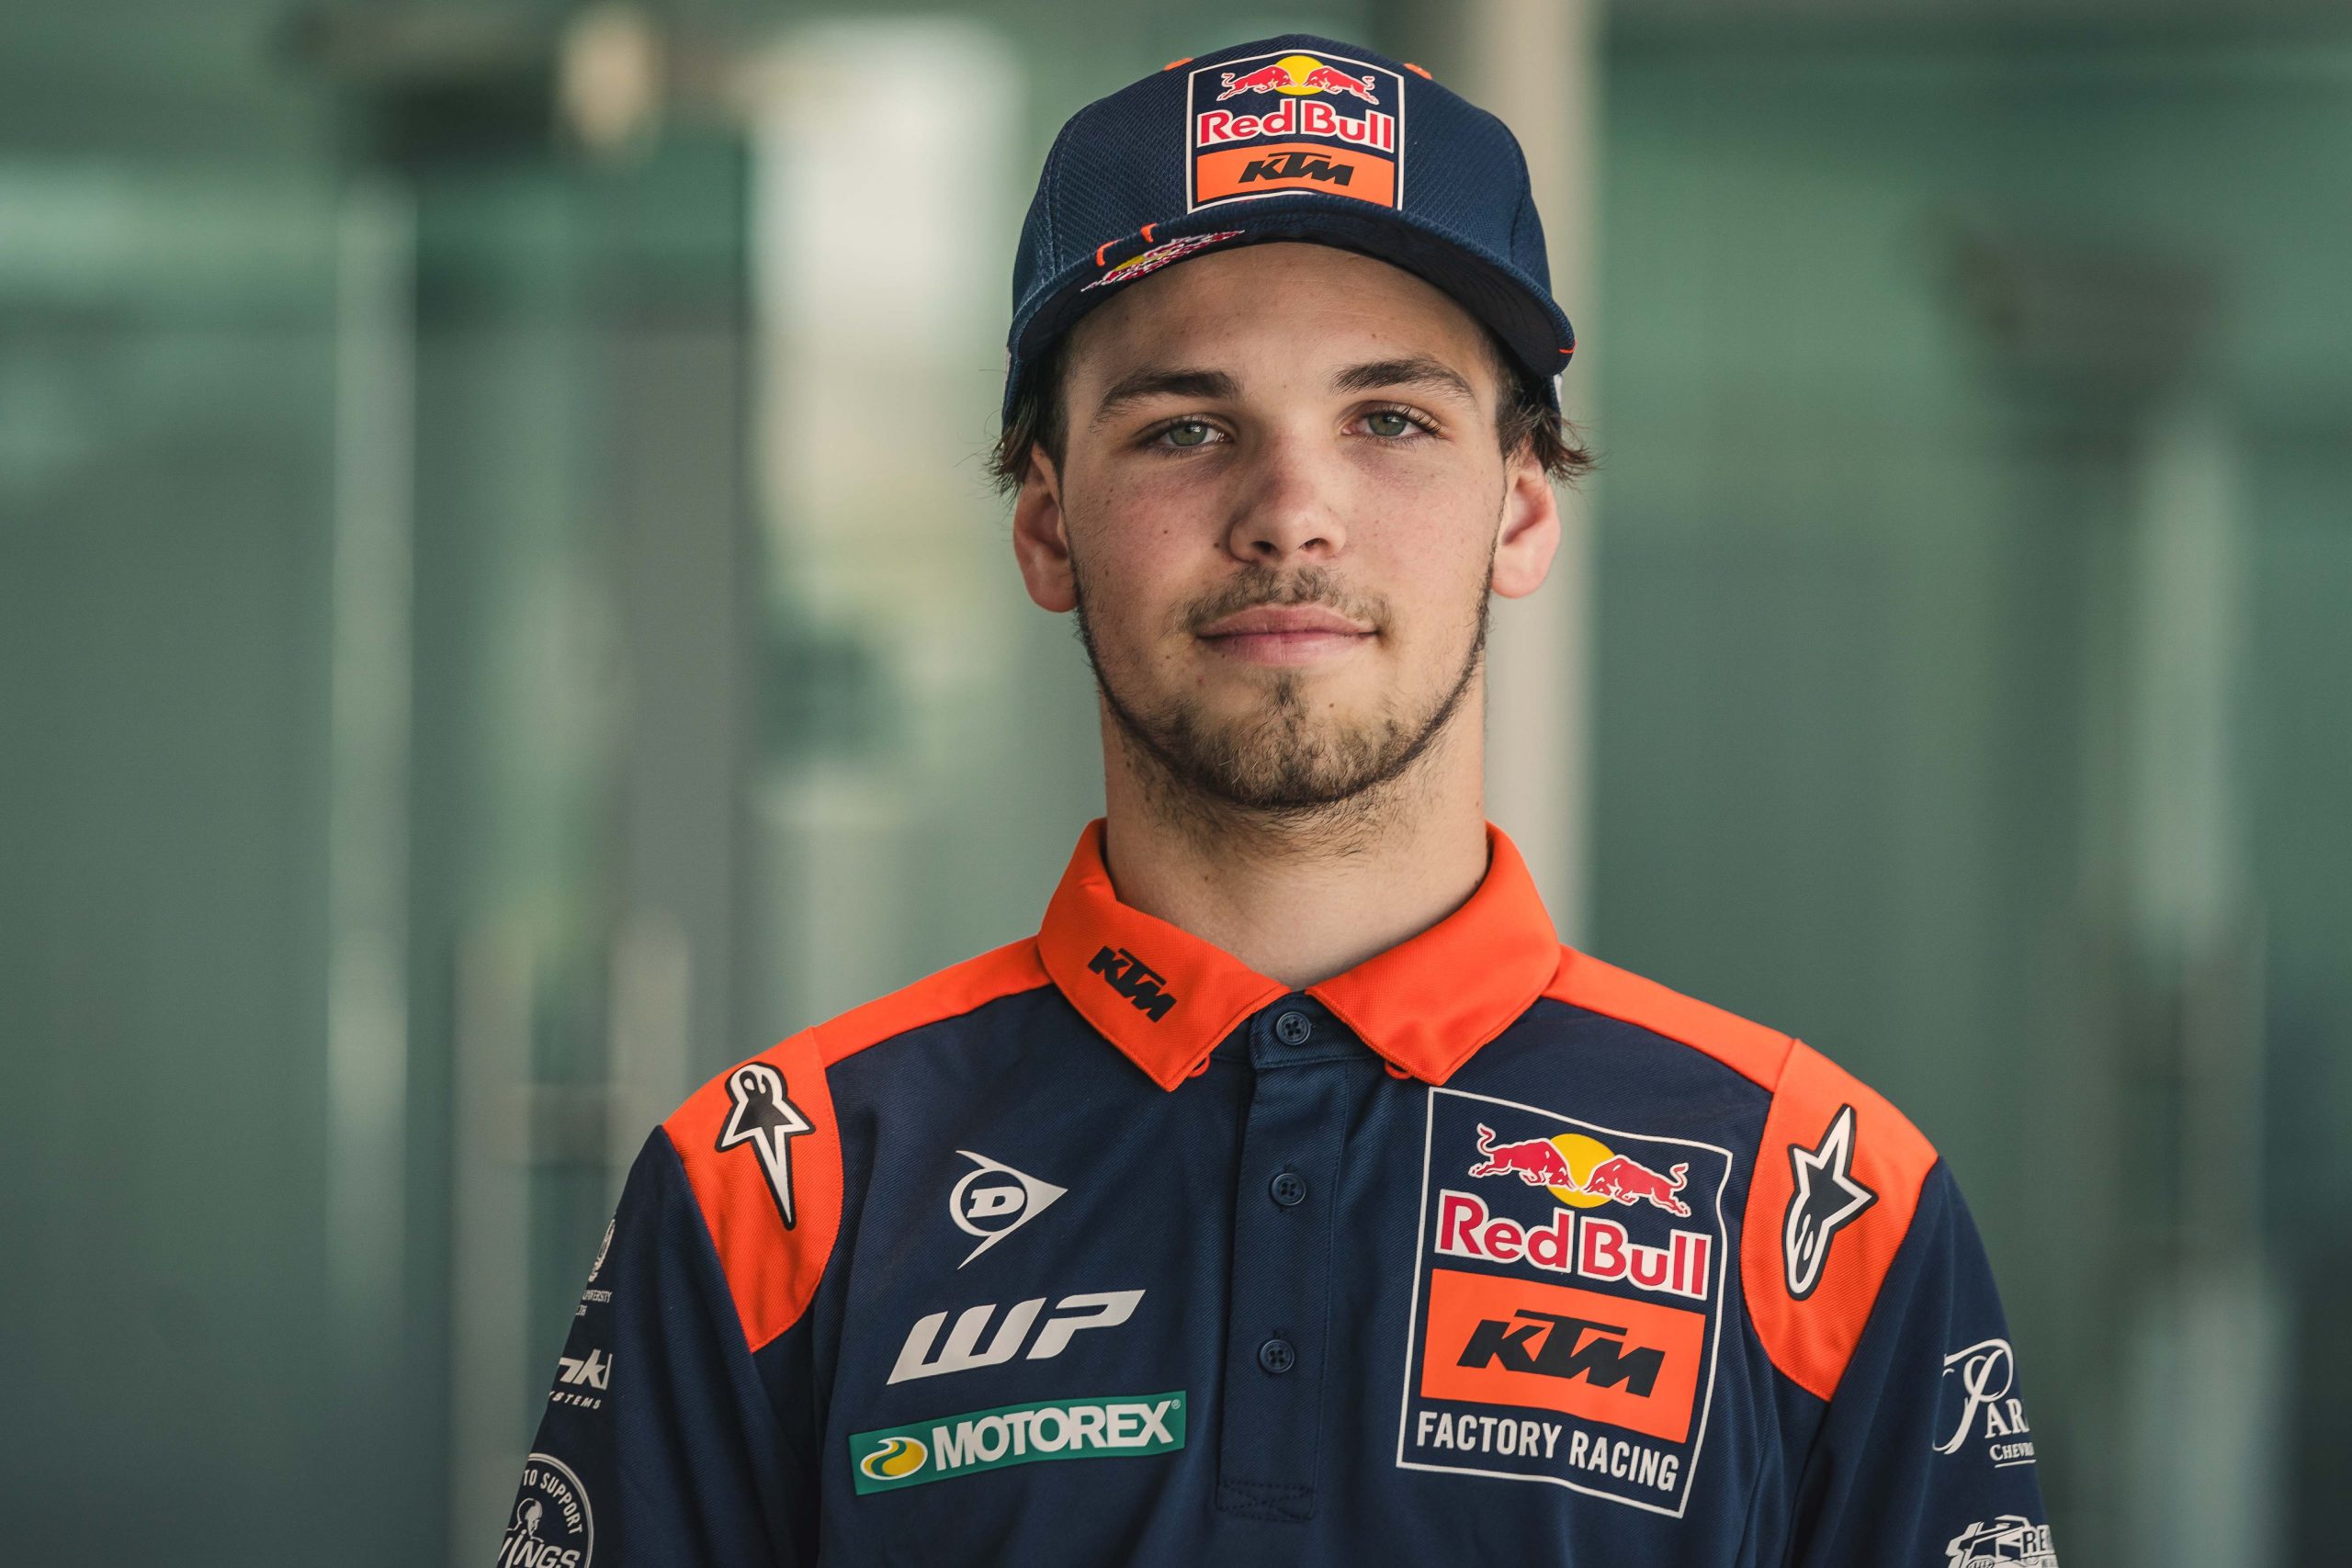 New Red Bull KTM Factory Racing Signing Julien Beaumer to debut at Budds Creek